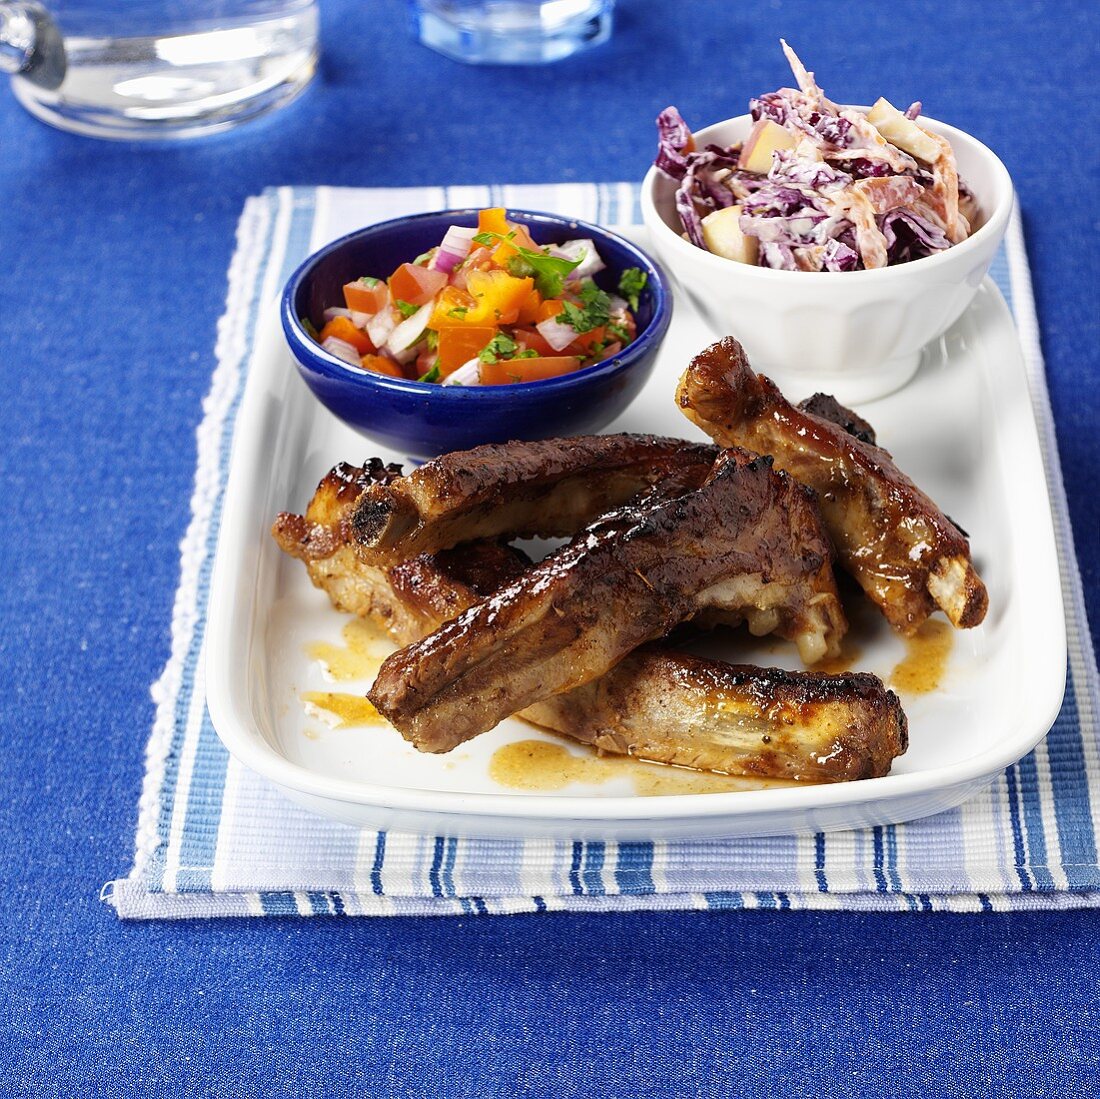 Spare-ribs with side-salad and coleslaw